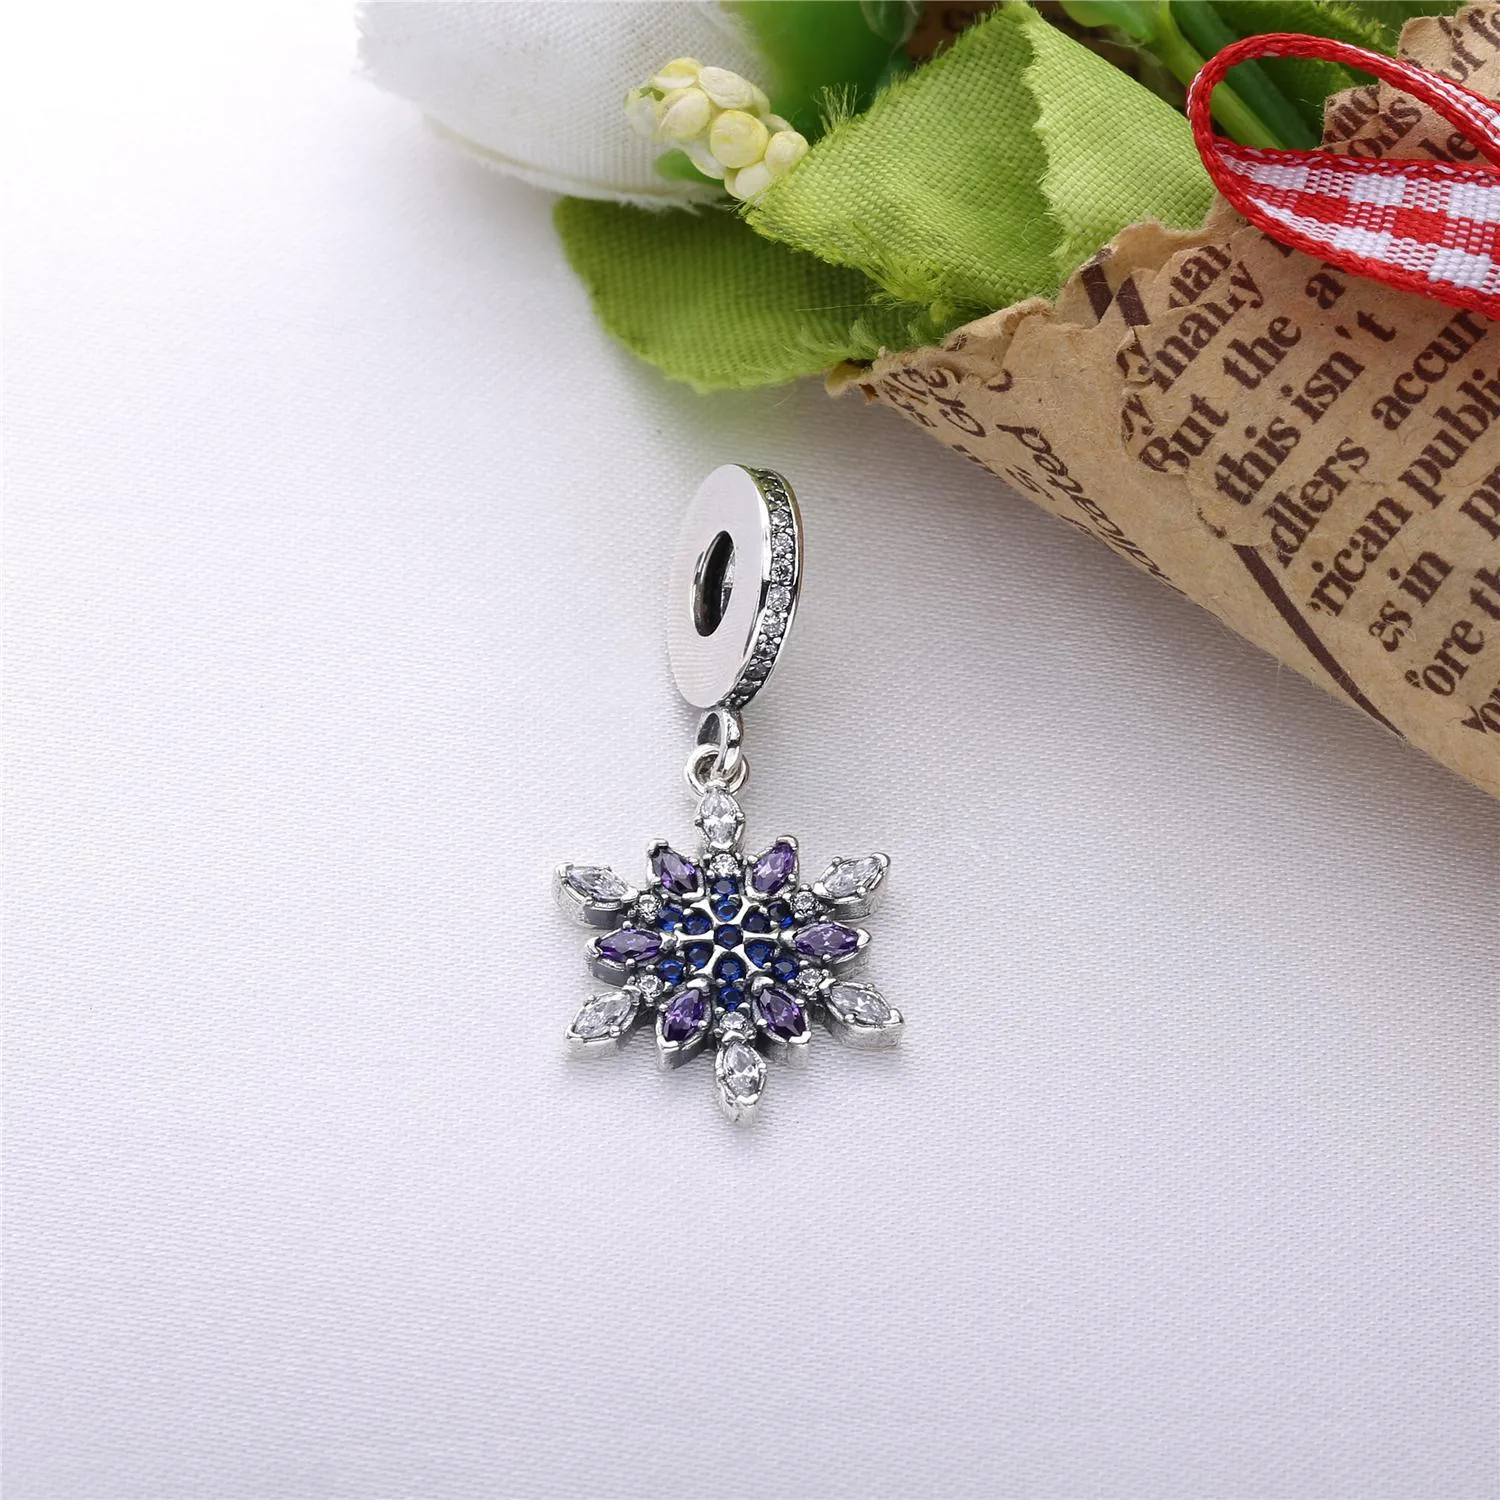 Snowflake silver dangle with clear cubic zirconia 791761nblmx